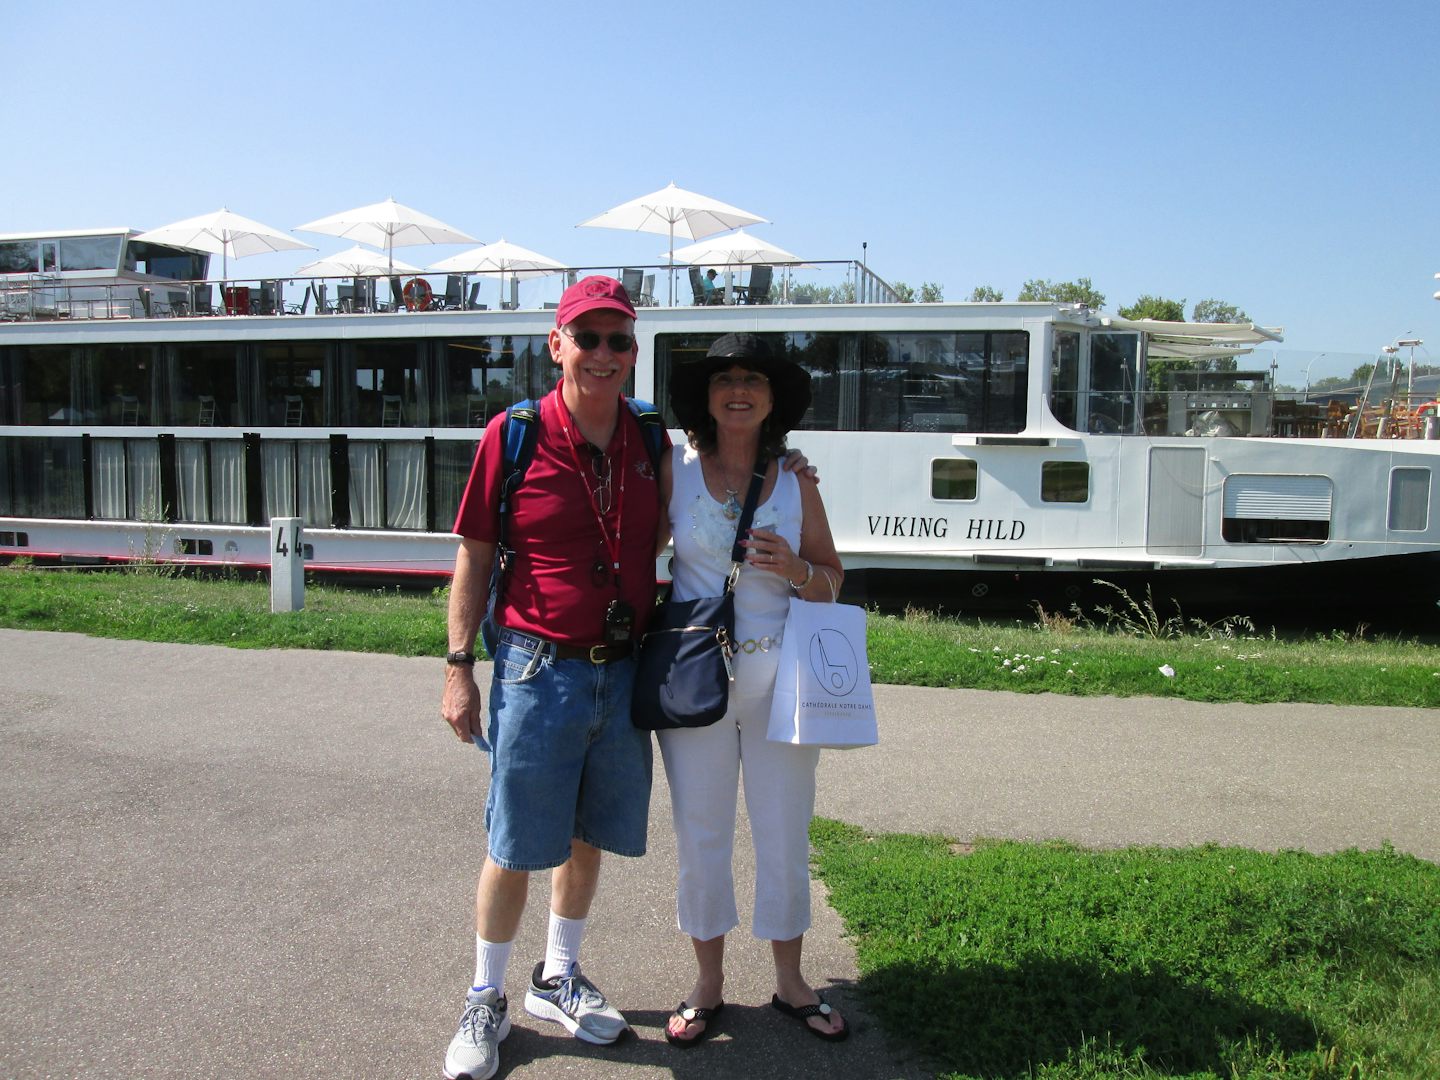 Bob and Janet McClearen in front of the Viking Hild